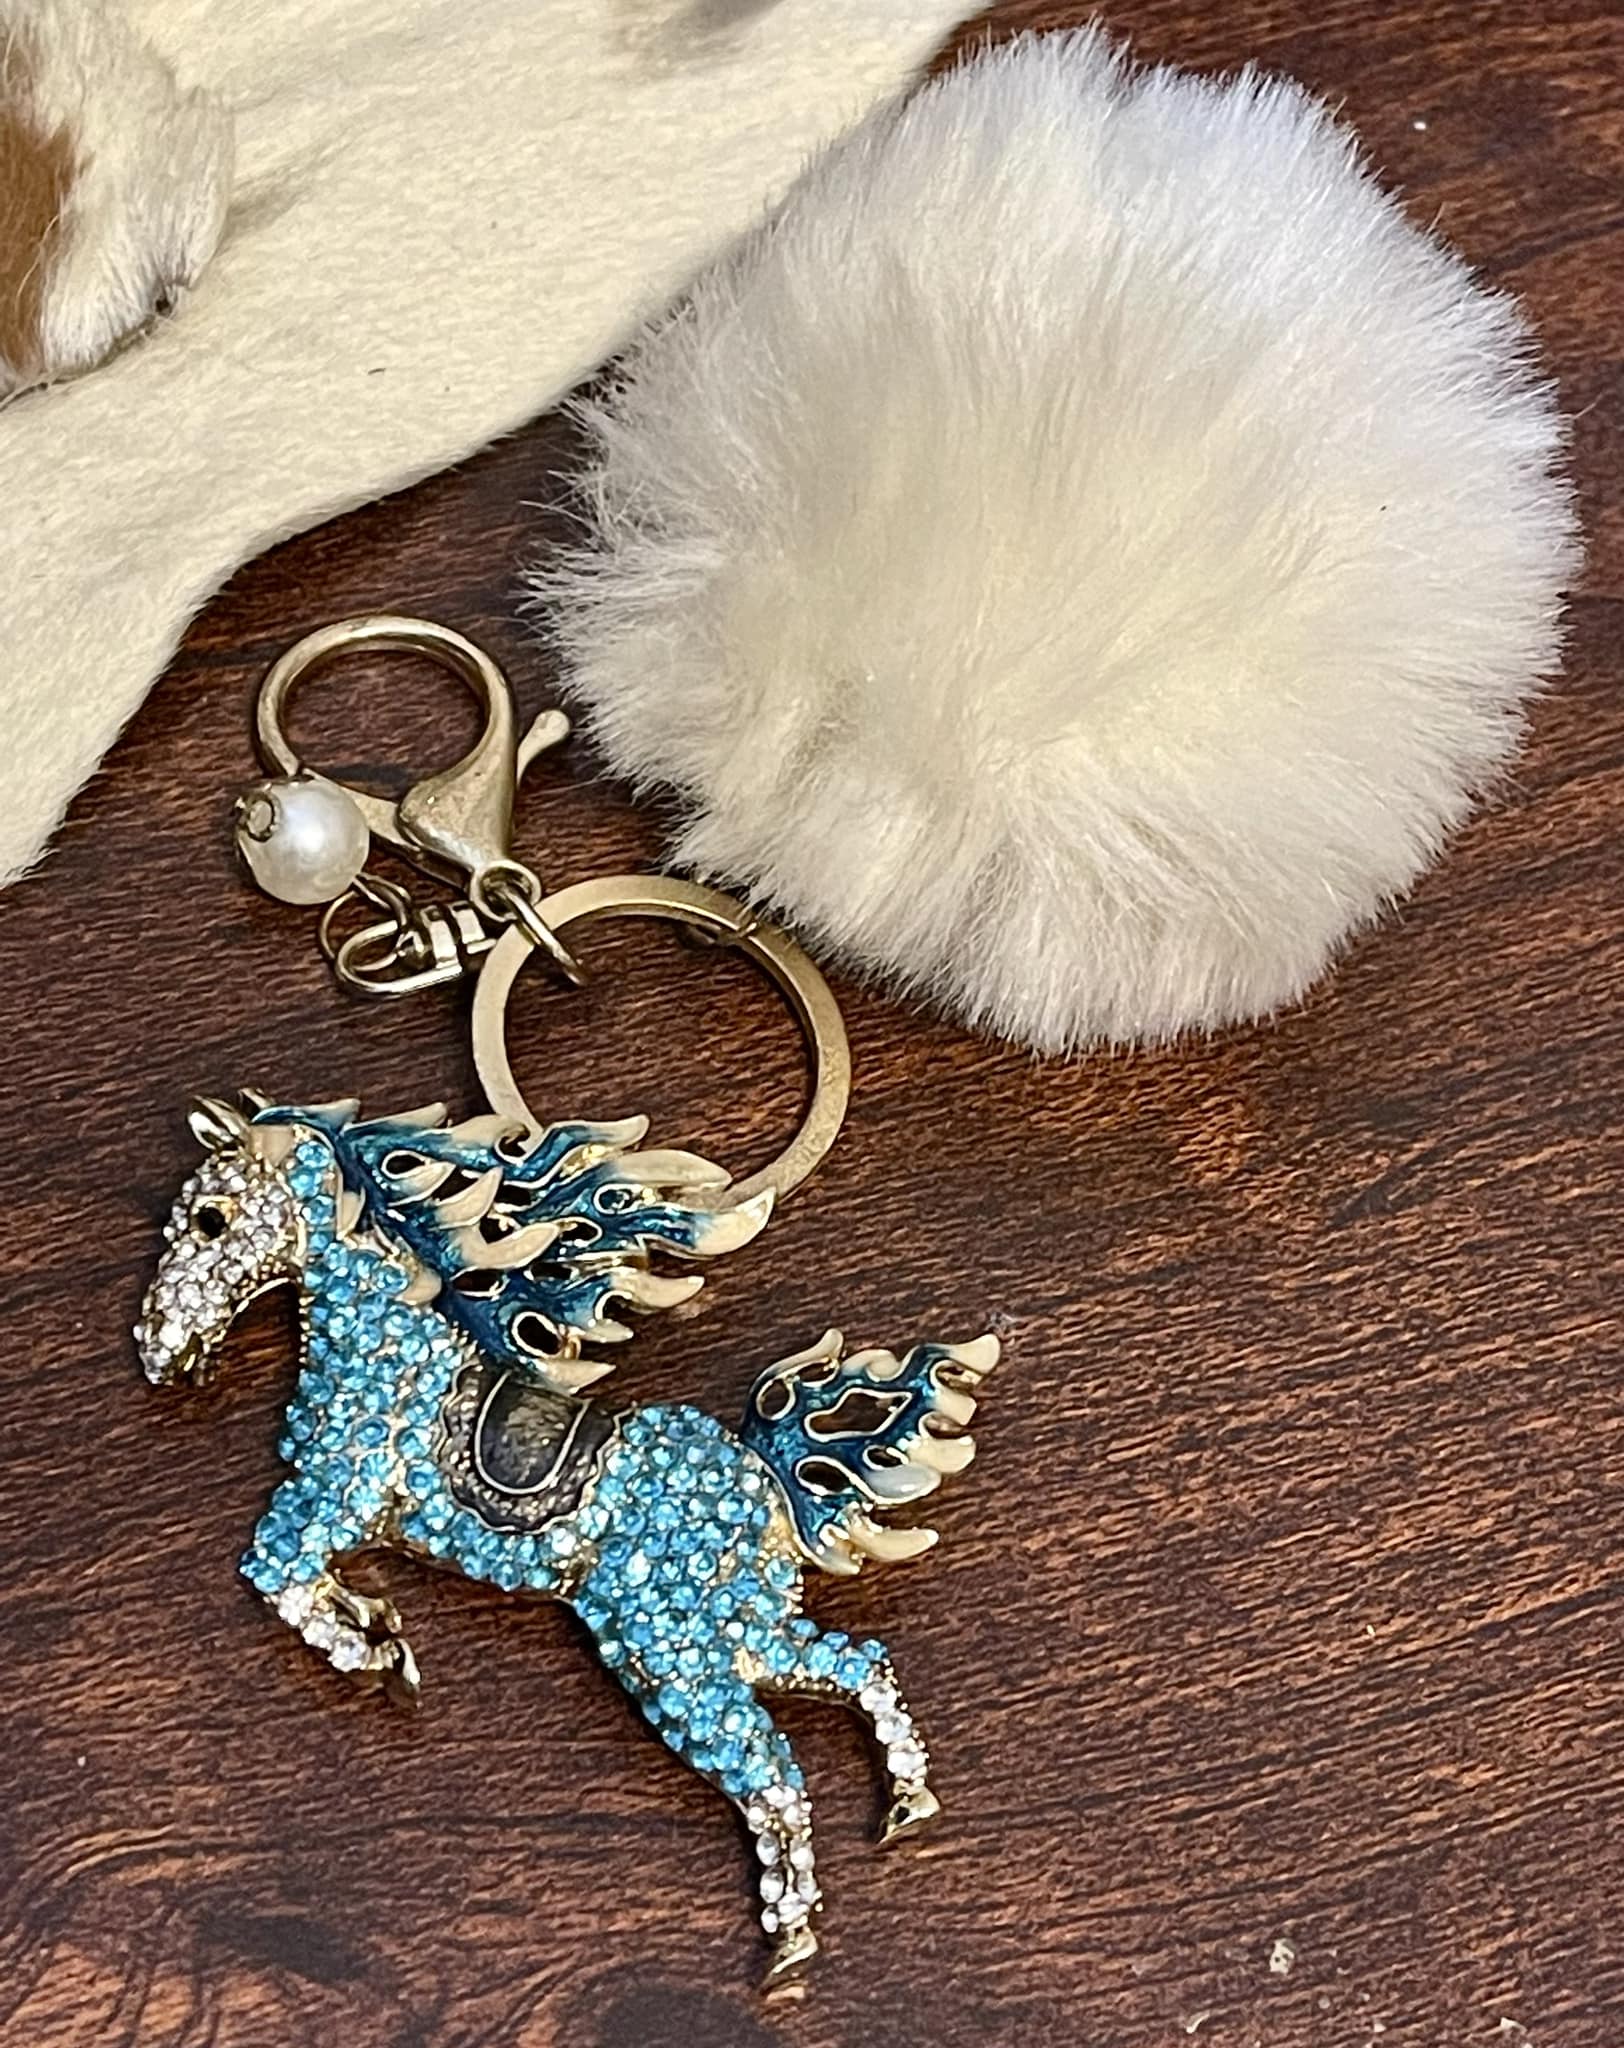 COWGIRL KEY CHAIN Handmade Pearl White Pom Gold Horse Teal Crystal Turquoise Horse Charm Purse Accessory / Key Chain